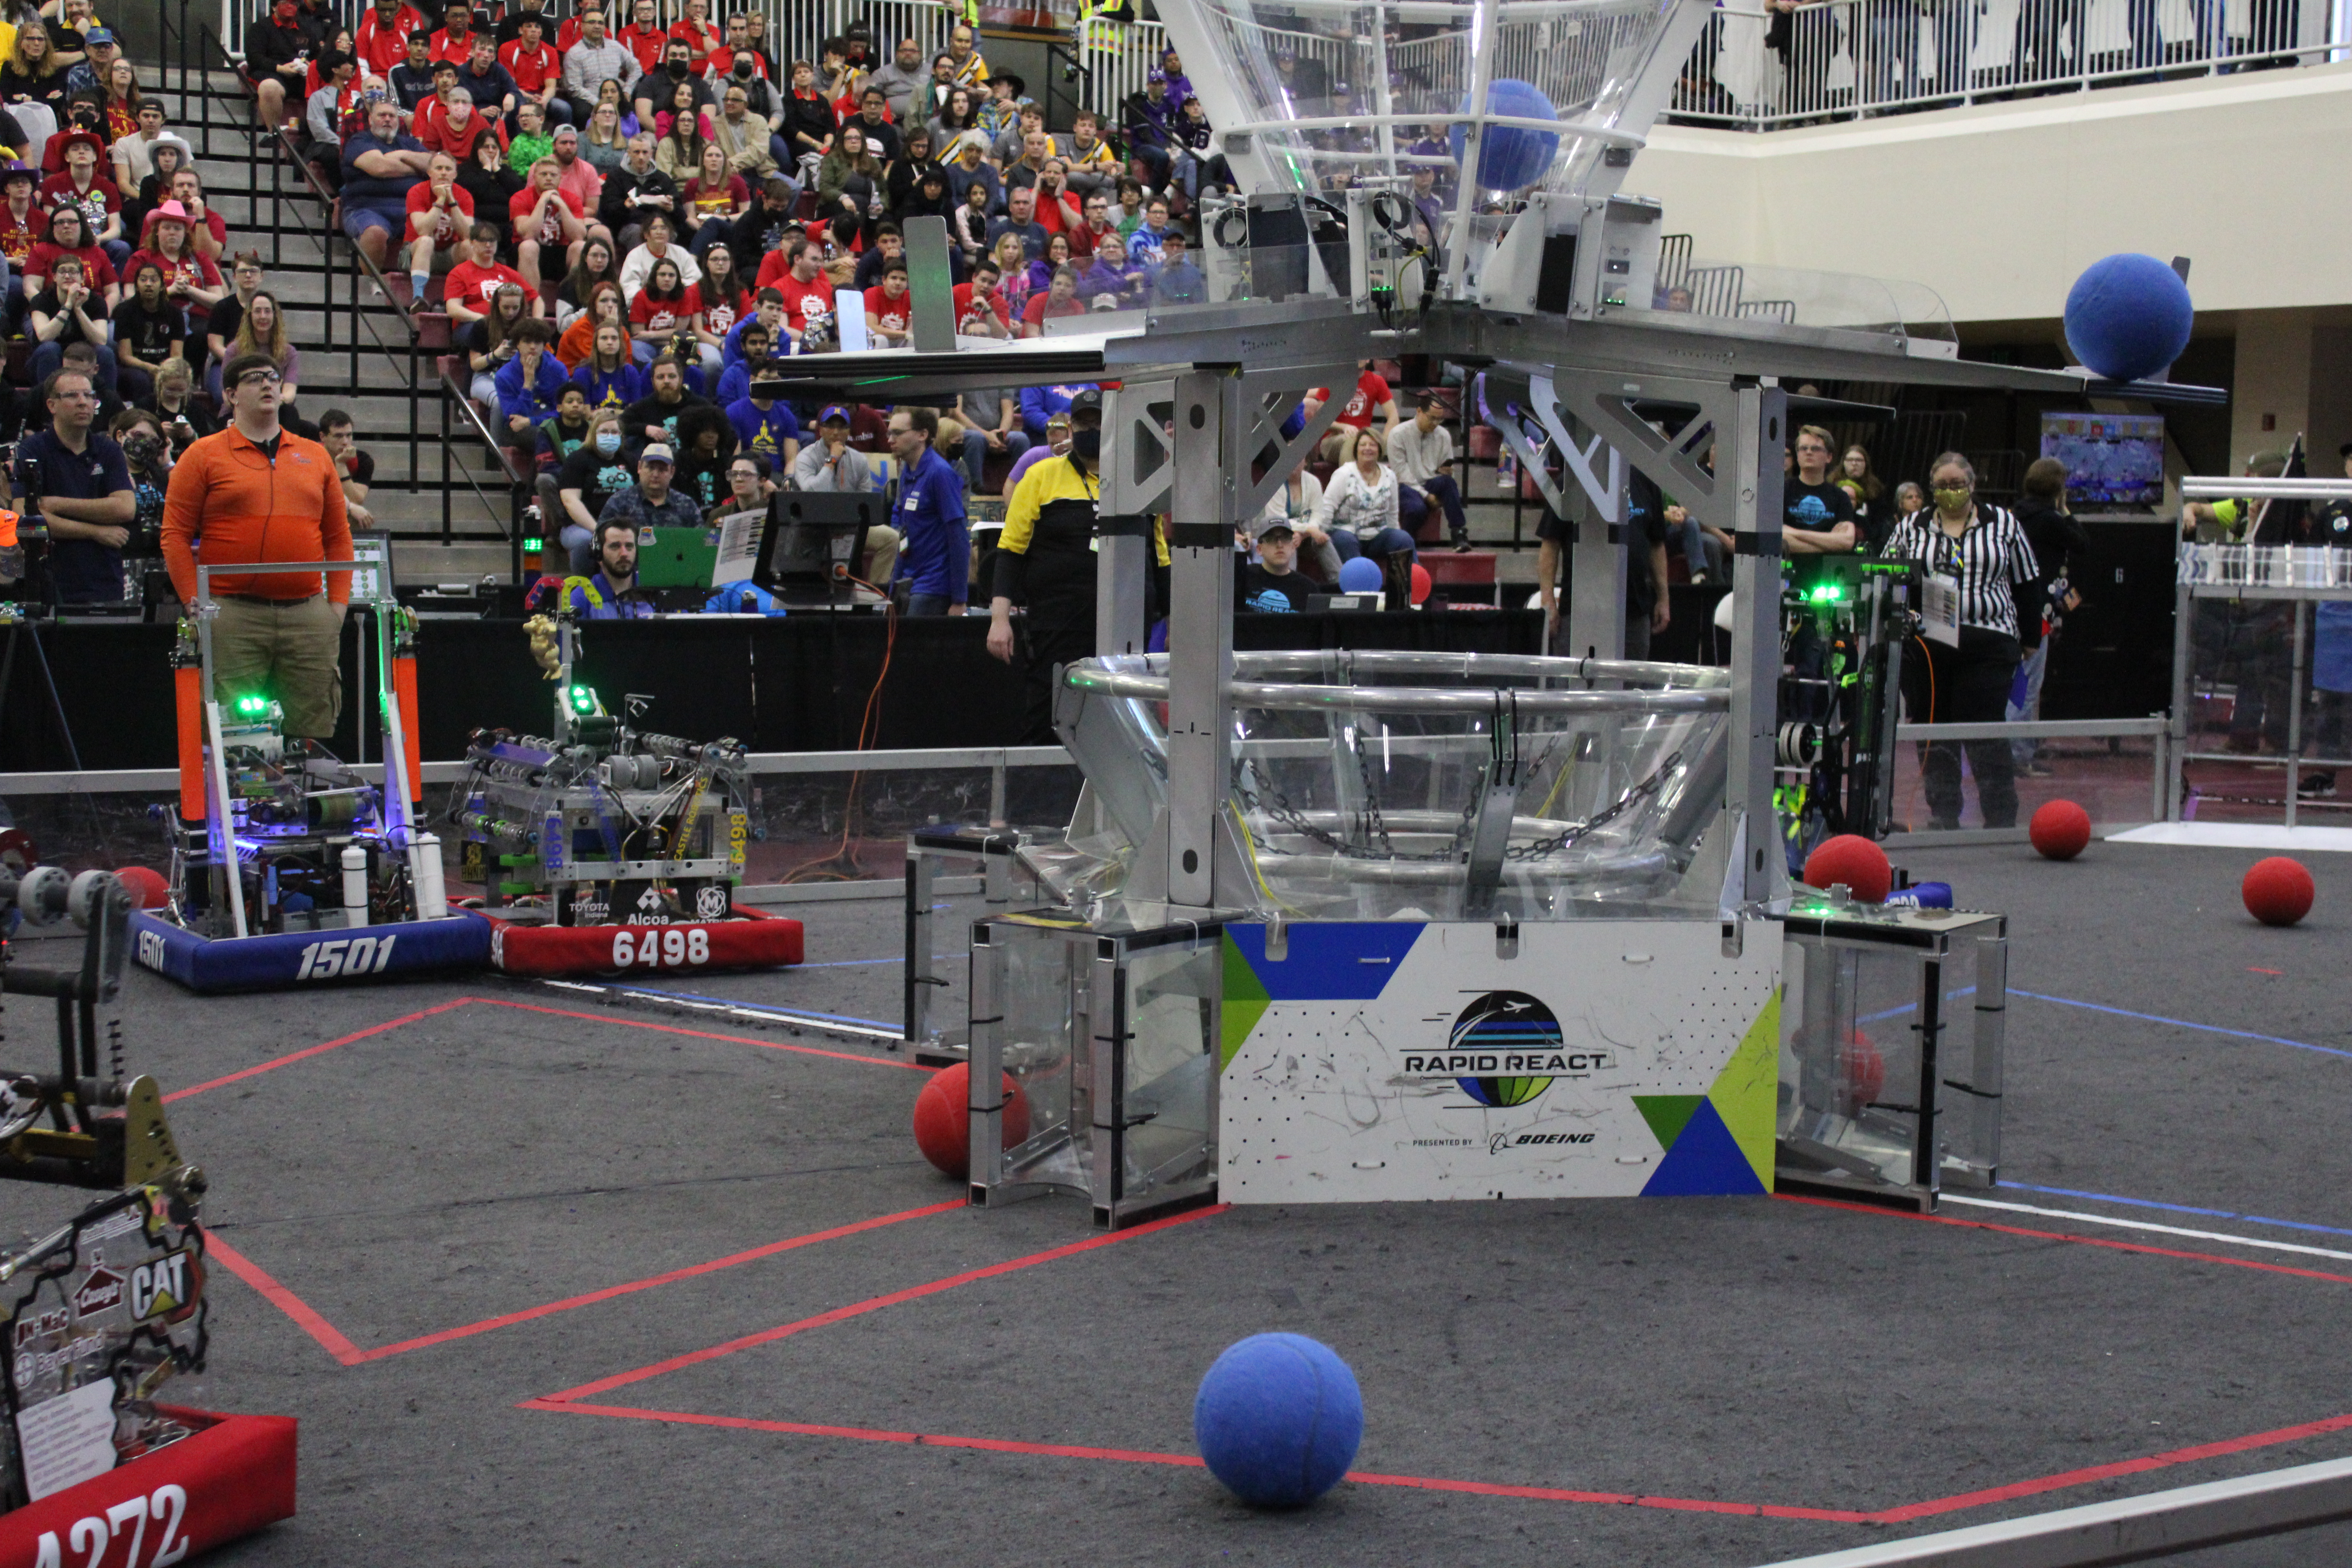 Robots compete to shoot balls in the hoop